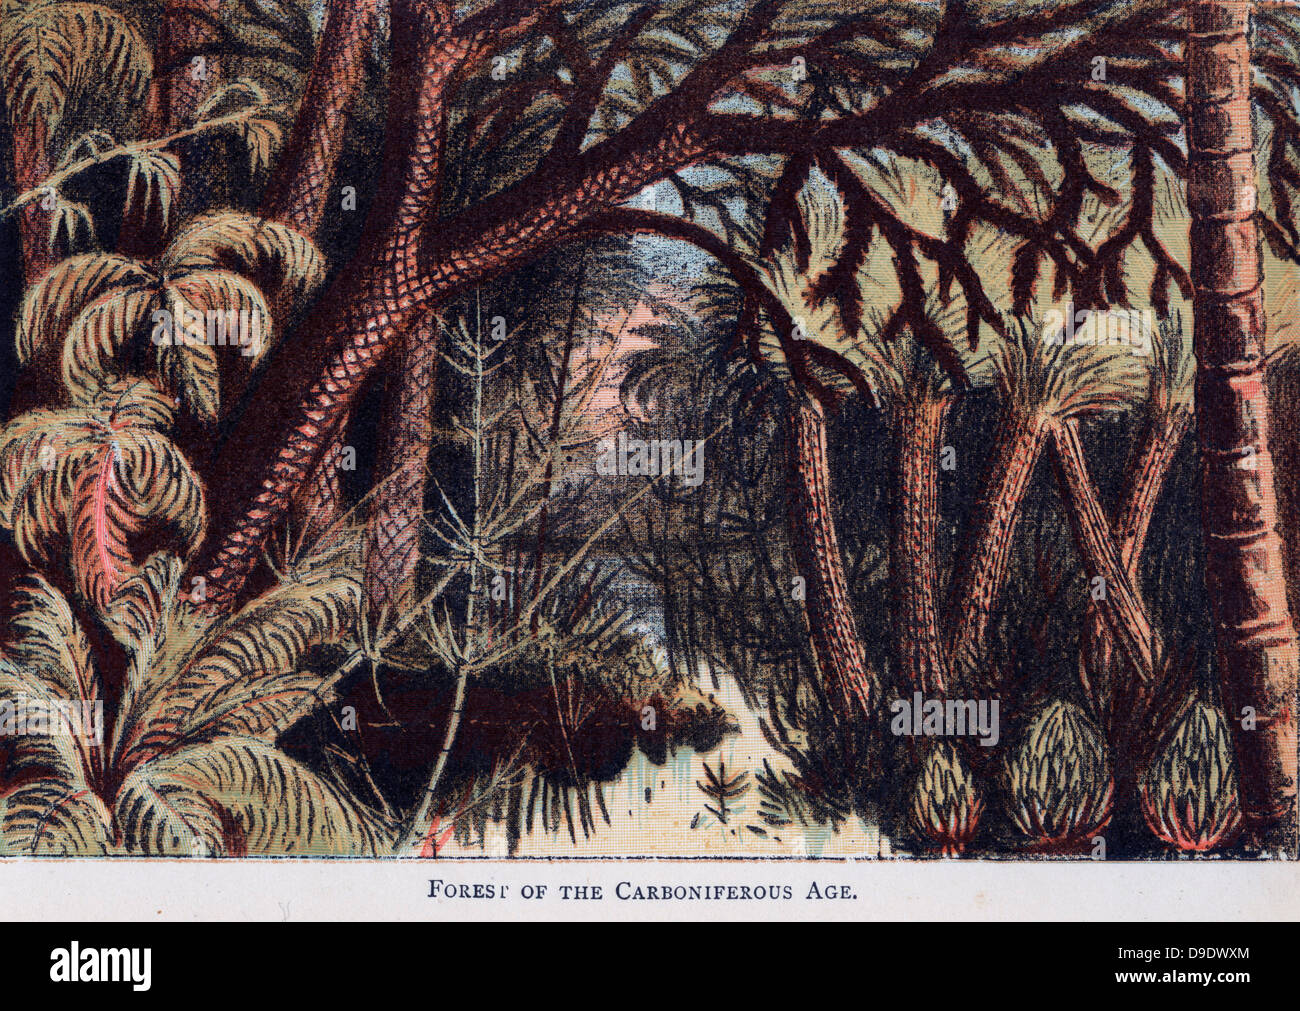 Impression of forest during Upper Carboniferous Period. Stock Photo